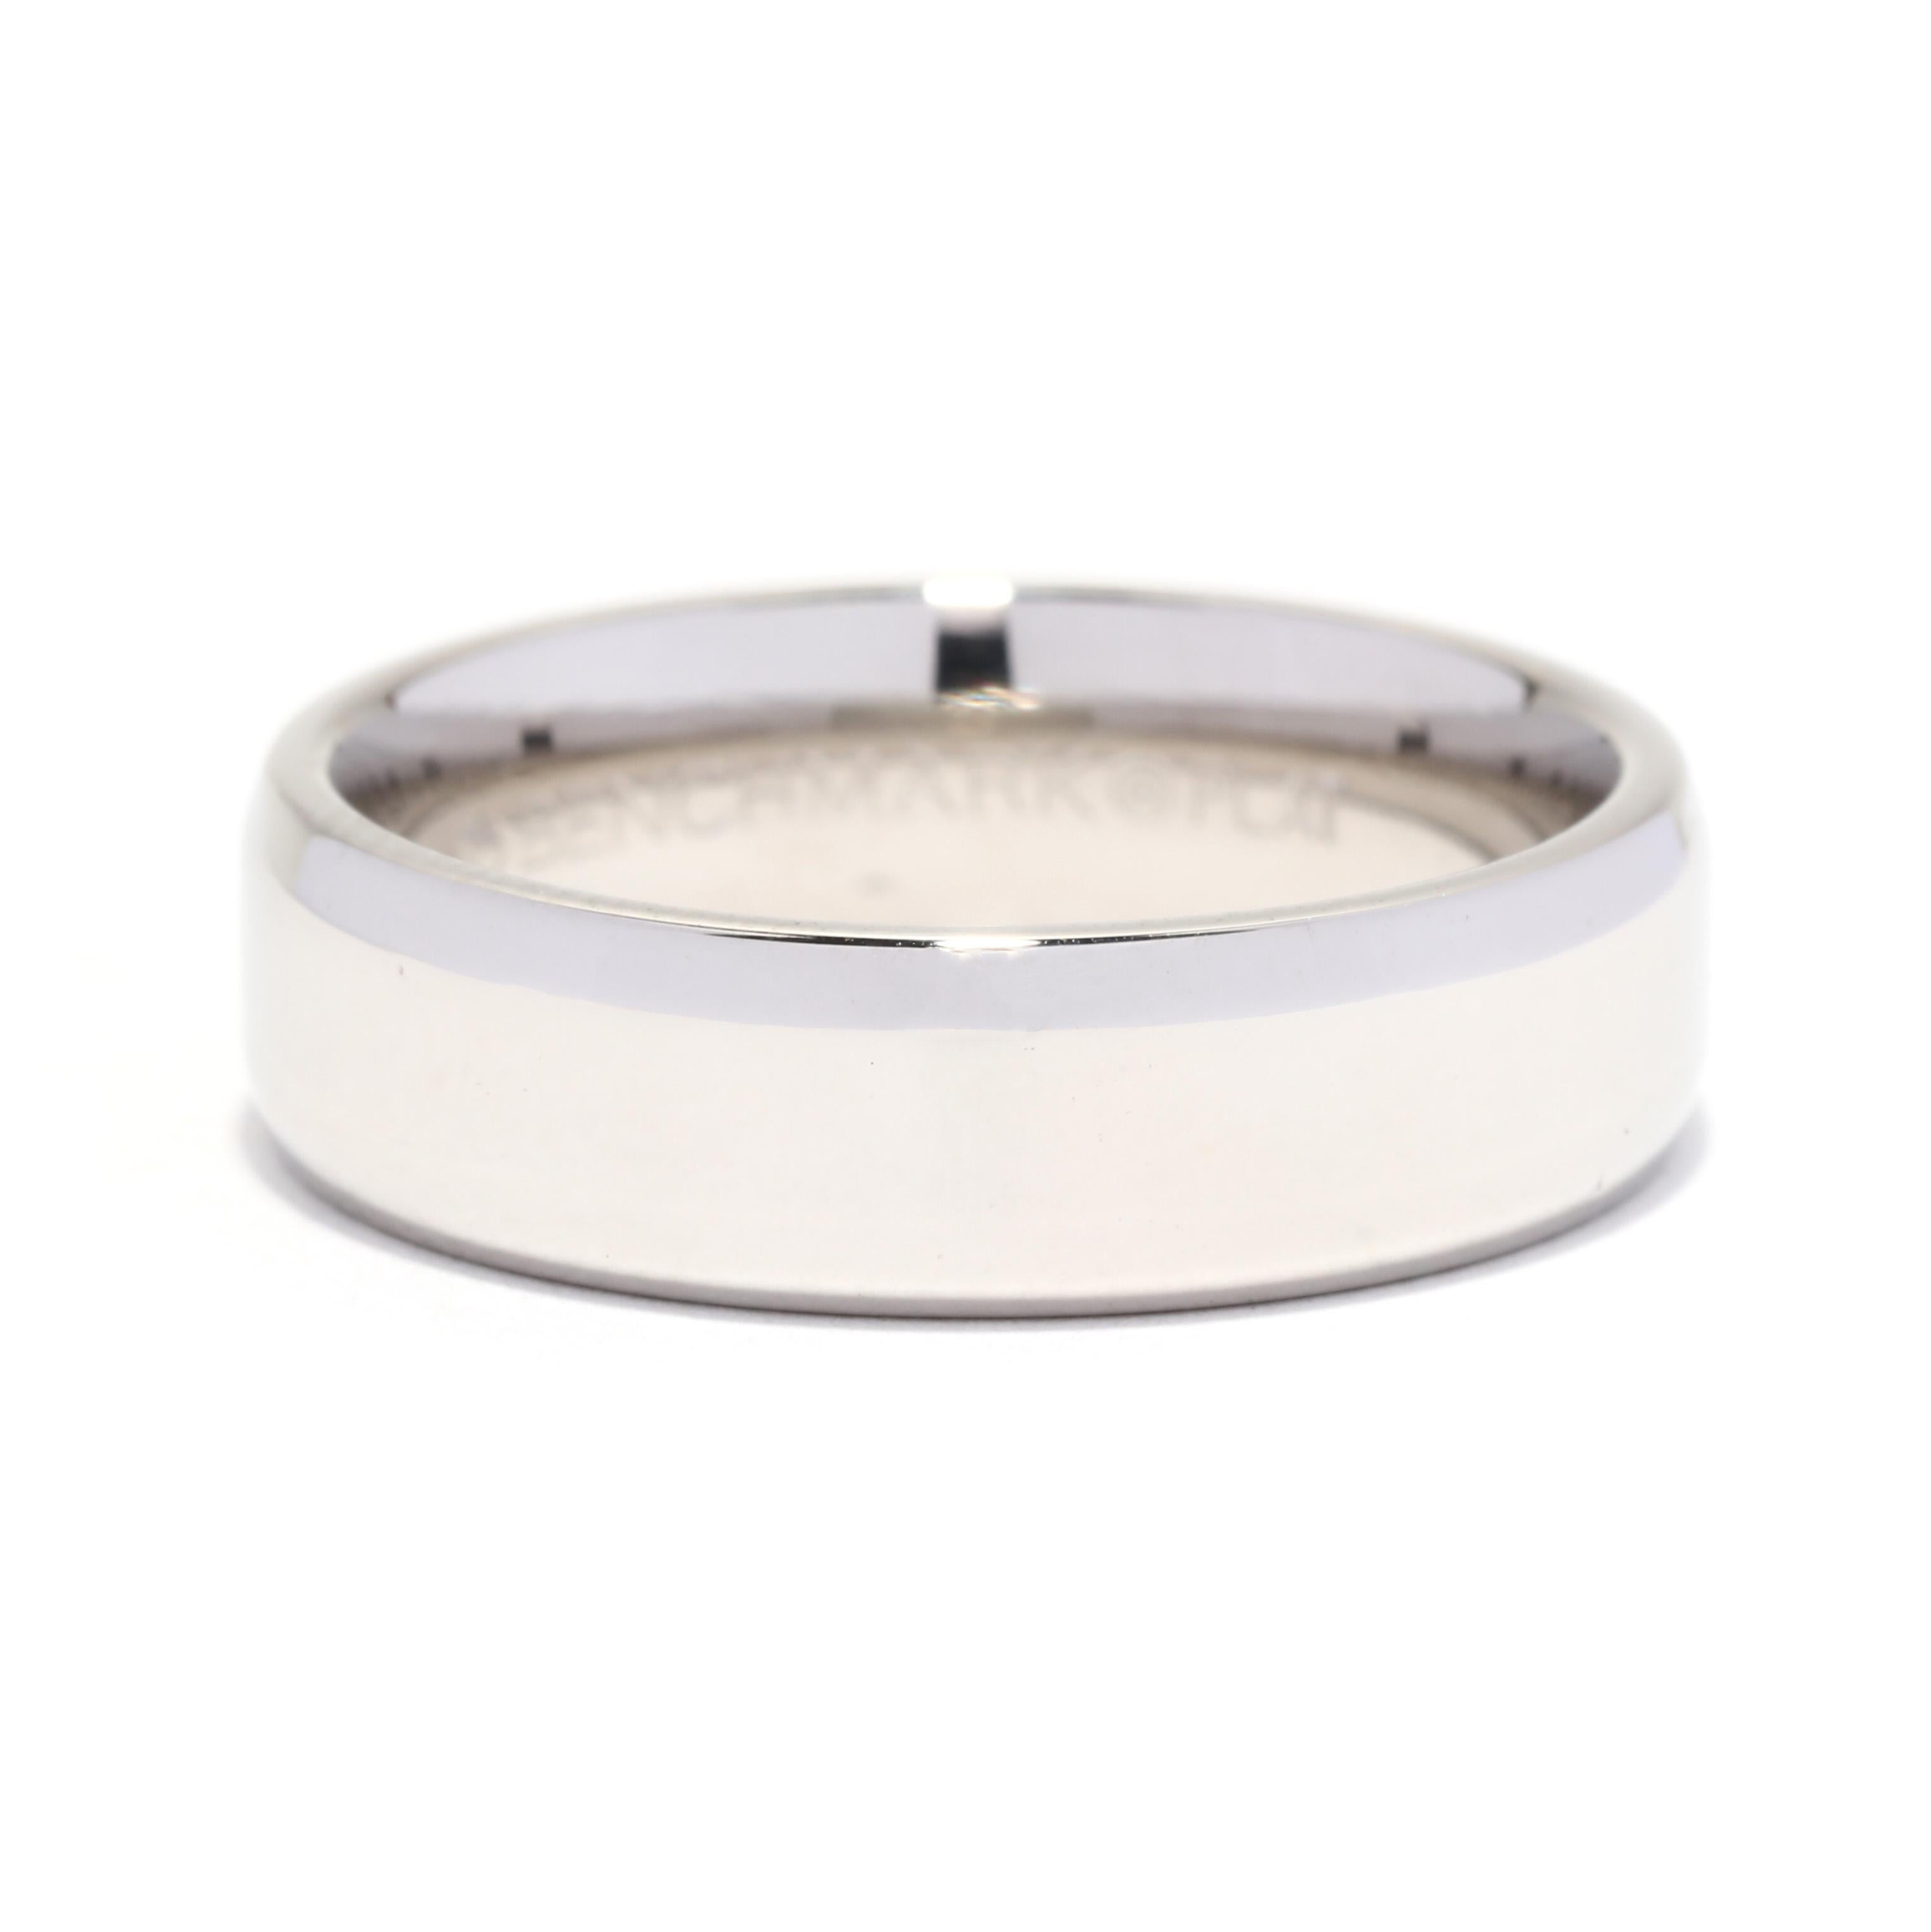 A vintage platinum wide beveled wedding band. This plain band features a polished plain band with bezel edging.

Ring Size: 8

Rise Off Of Finger: 2 mm

Width: 5.9 mm

Weight: 7.7 dwts. / 12 grams

Stamps: BENCHMARK PLAT

Ring Sizings &